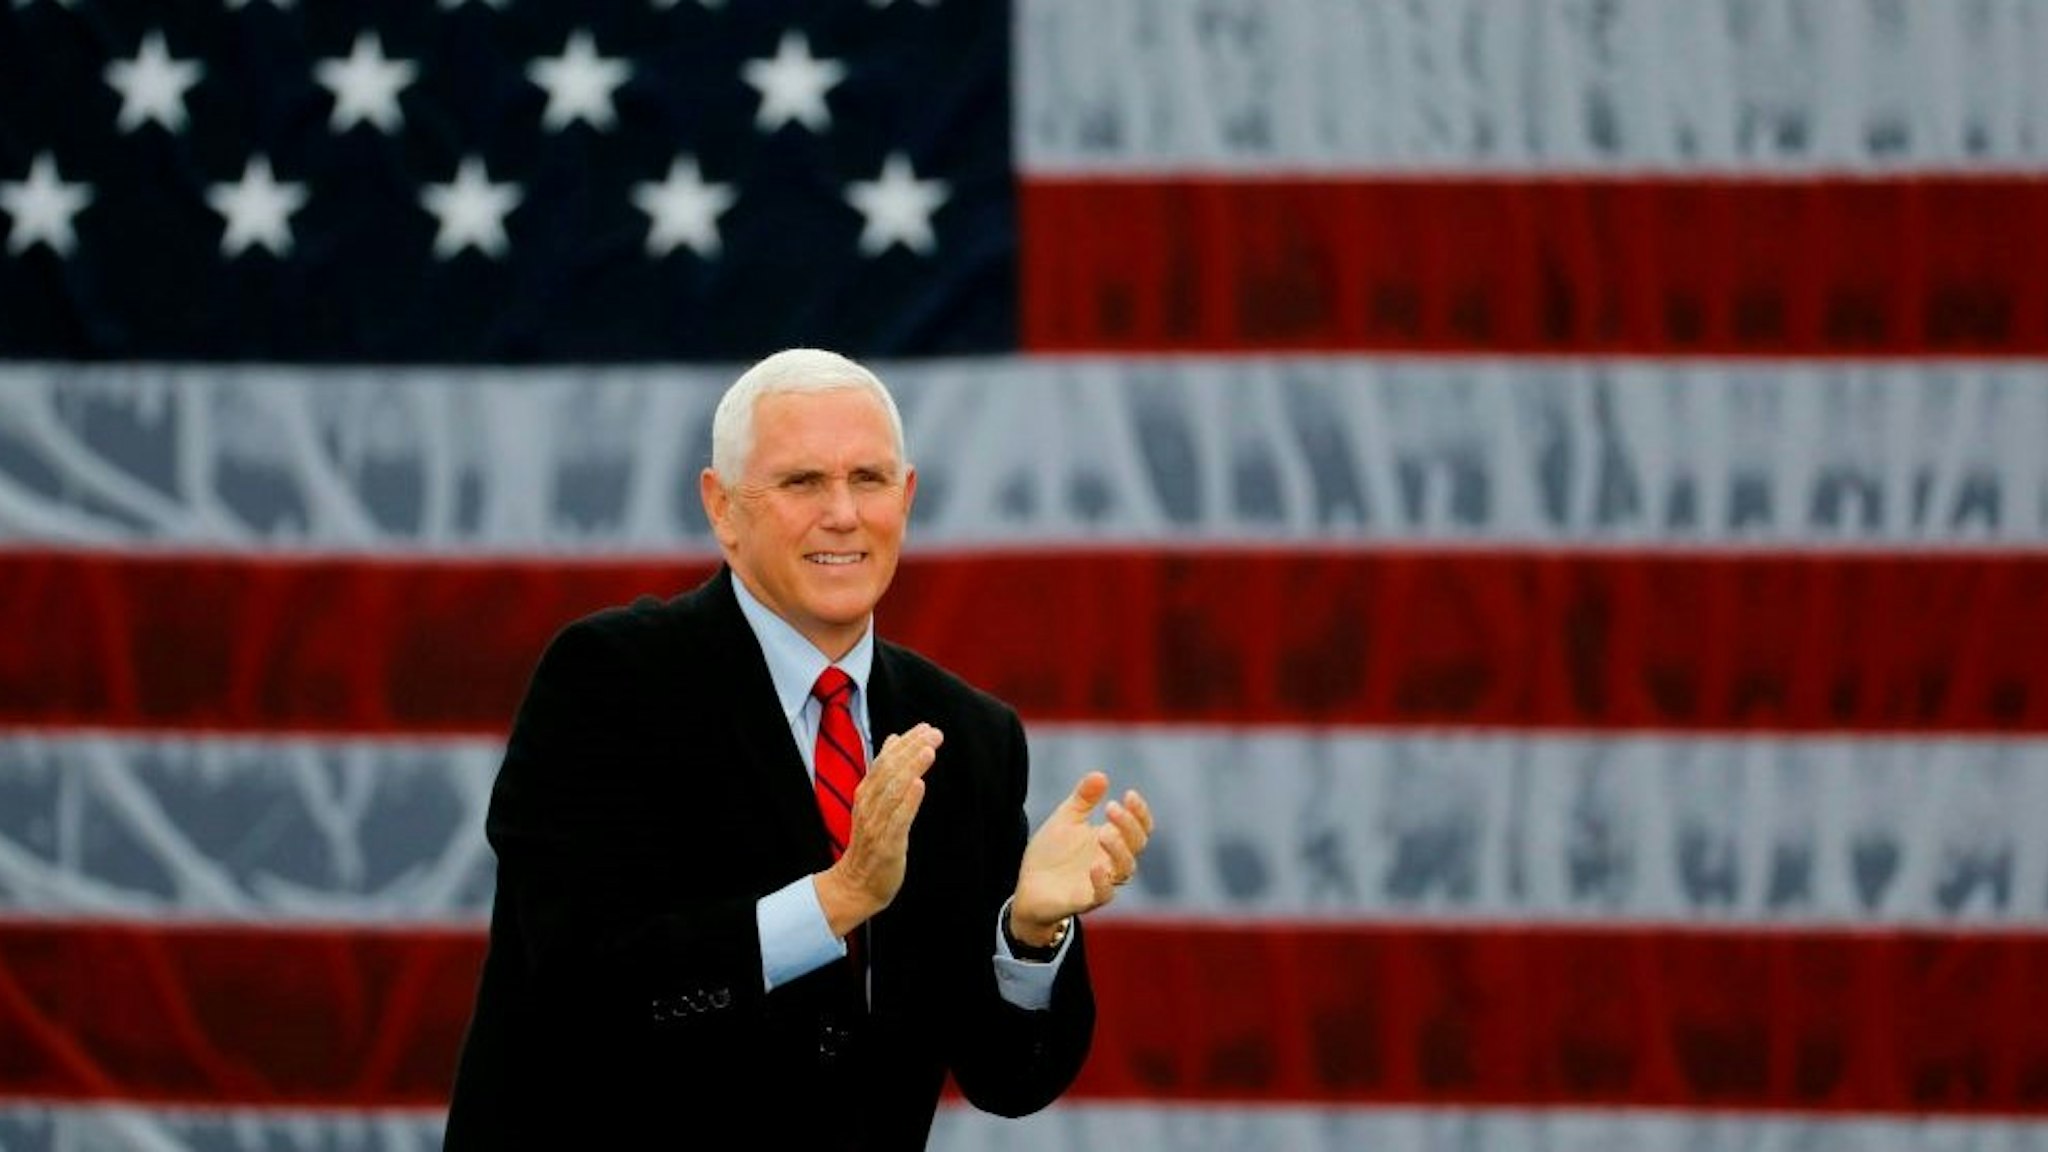 US Vice President Mike Pence walks on stage at a "Make America Great Again!" campaign event at Oakland County International Airport in Waterford, Michigan, on October 22, 2020. (Photo by JEFF KOWALSKY / AFP) (Photo by